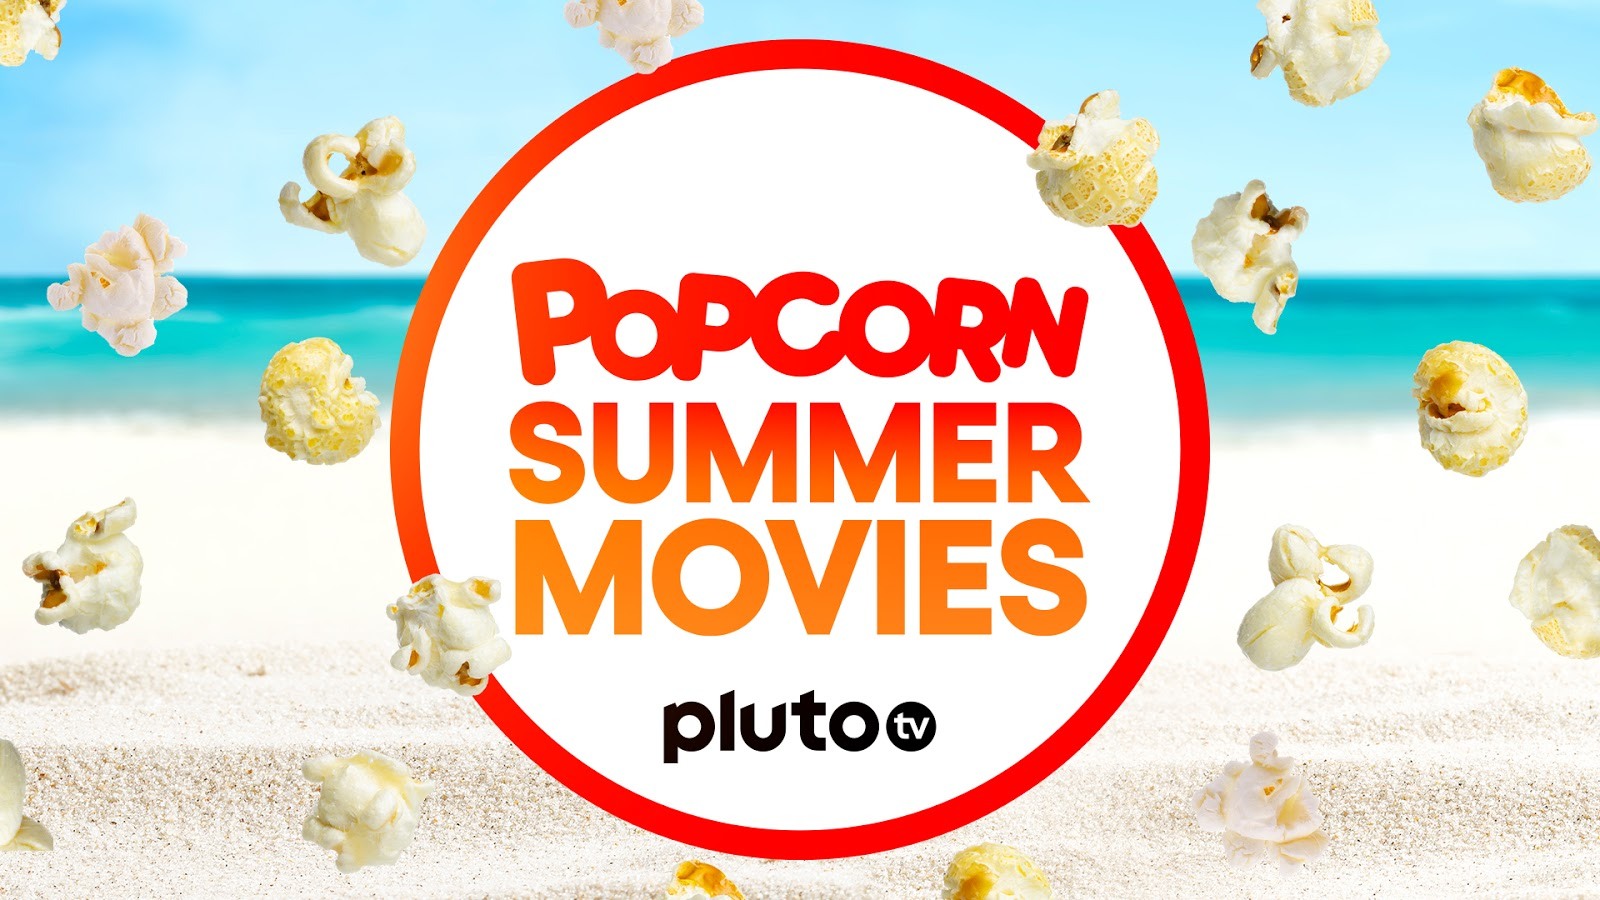 Pluto TV is Adding Over 70 Movies in July: Here’s the Full List